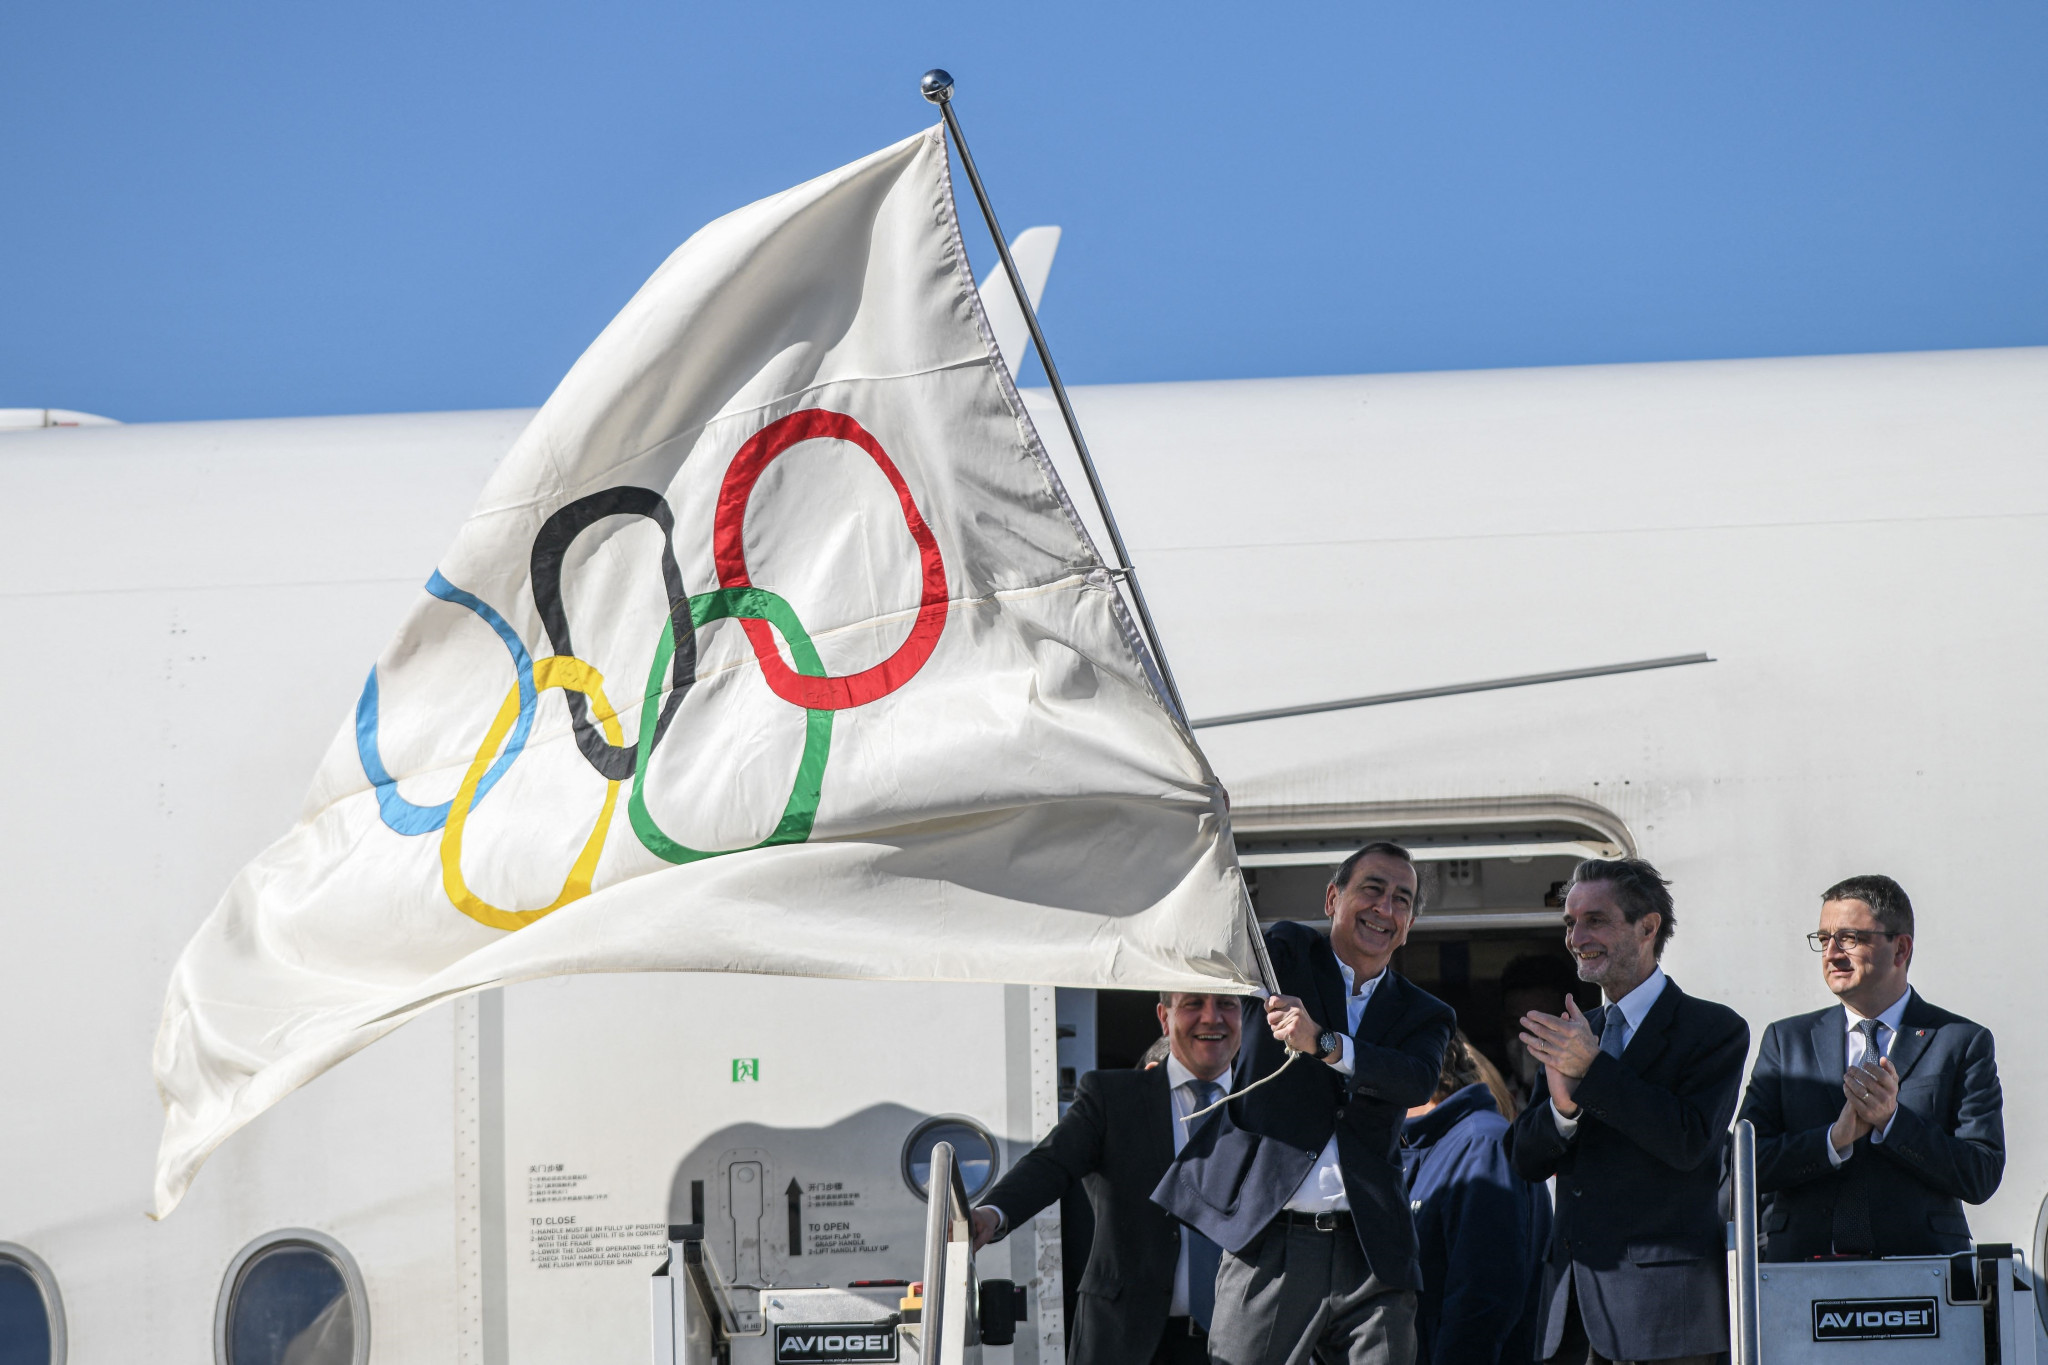 Milan Cortina 2026 has received the Olympic Flag as organisers prepare to stage the Games in four years' time ©Getty Images